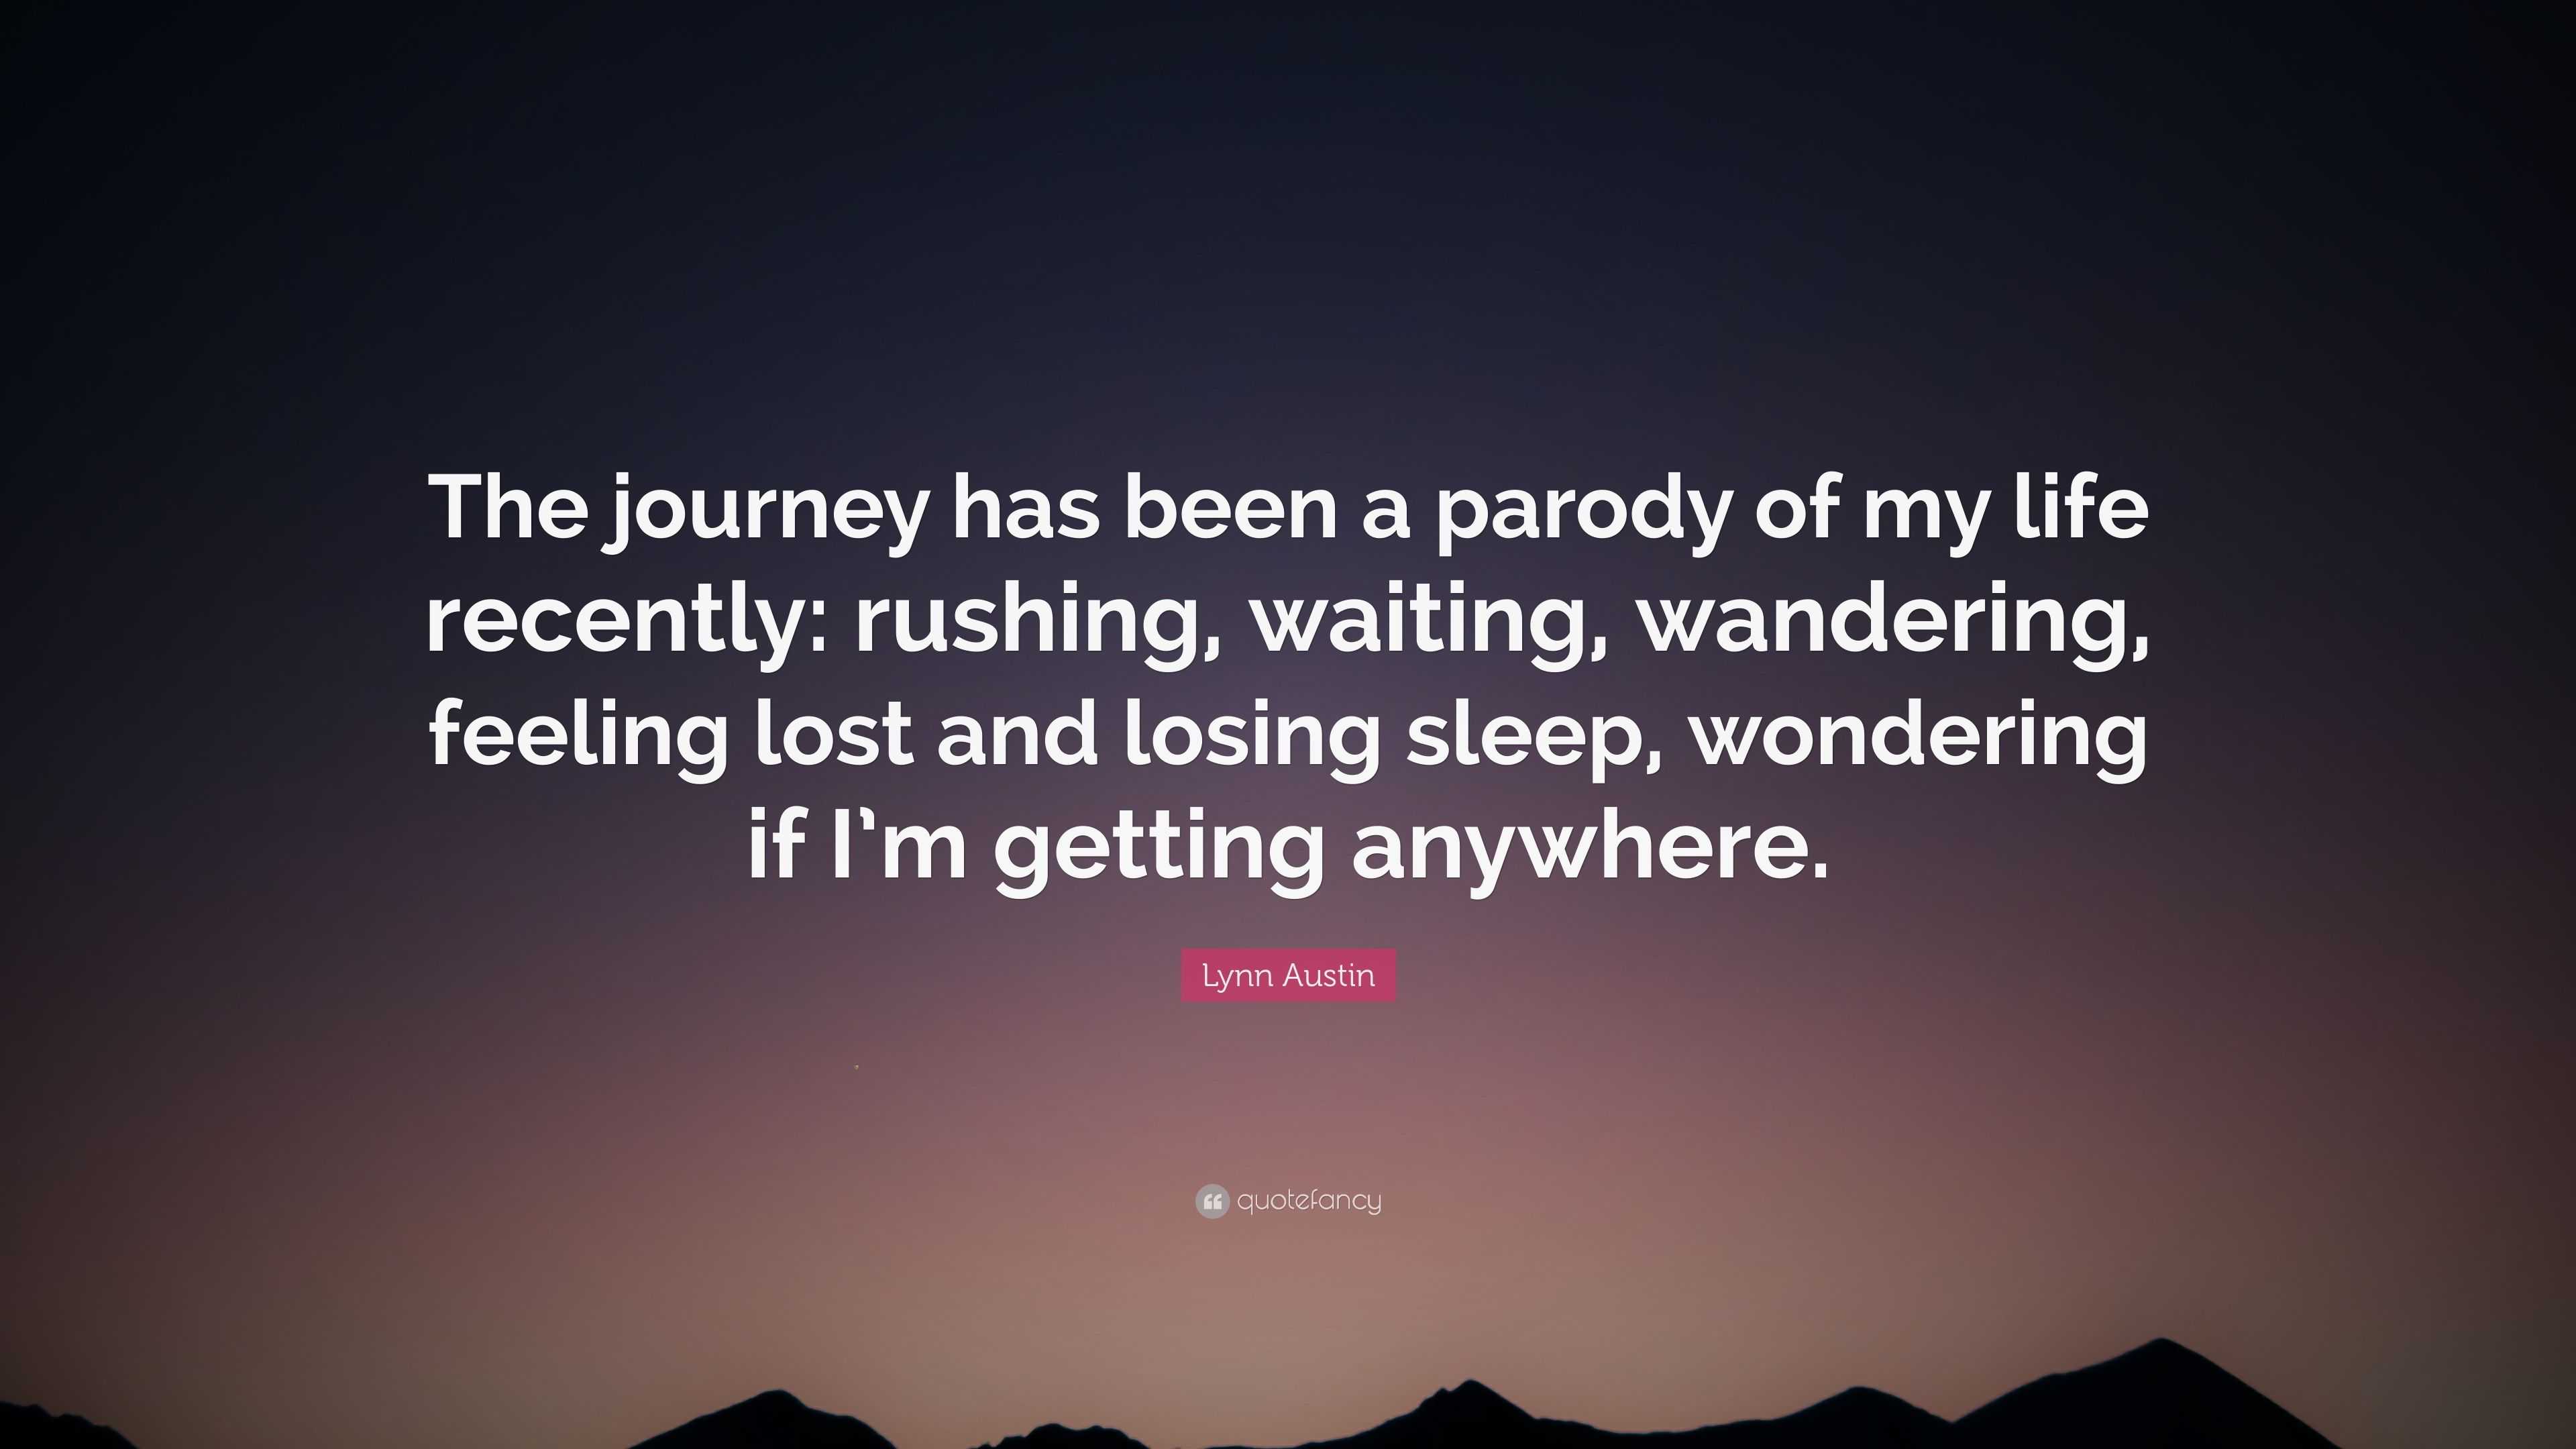 Lynn Austin Quote “The journey has been a parody of my life recently